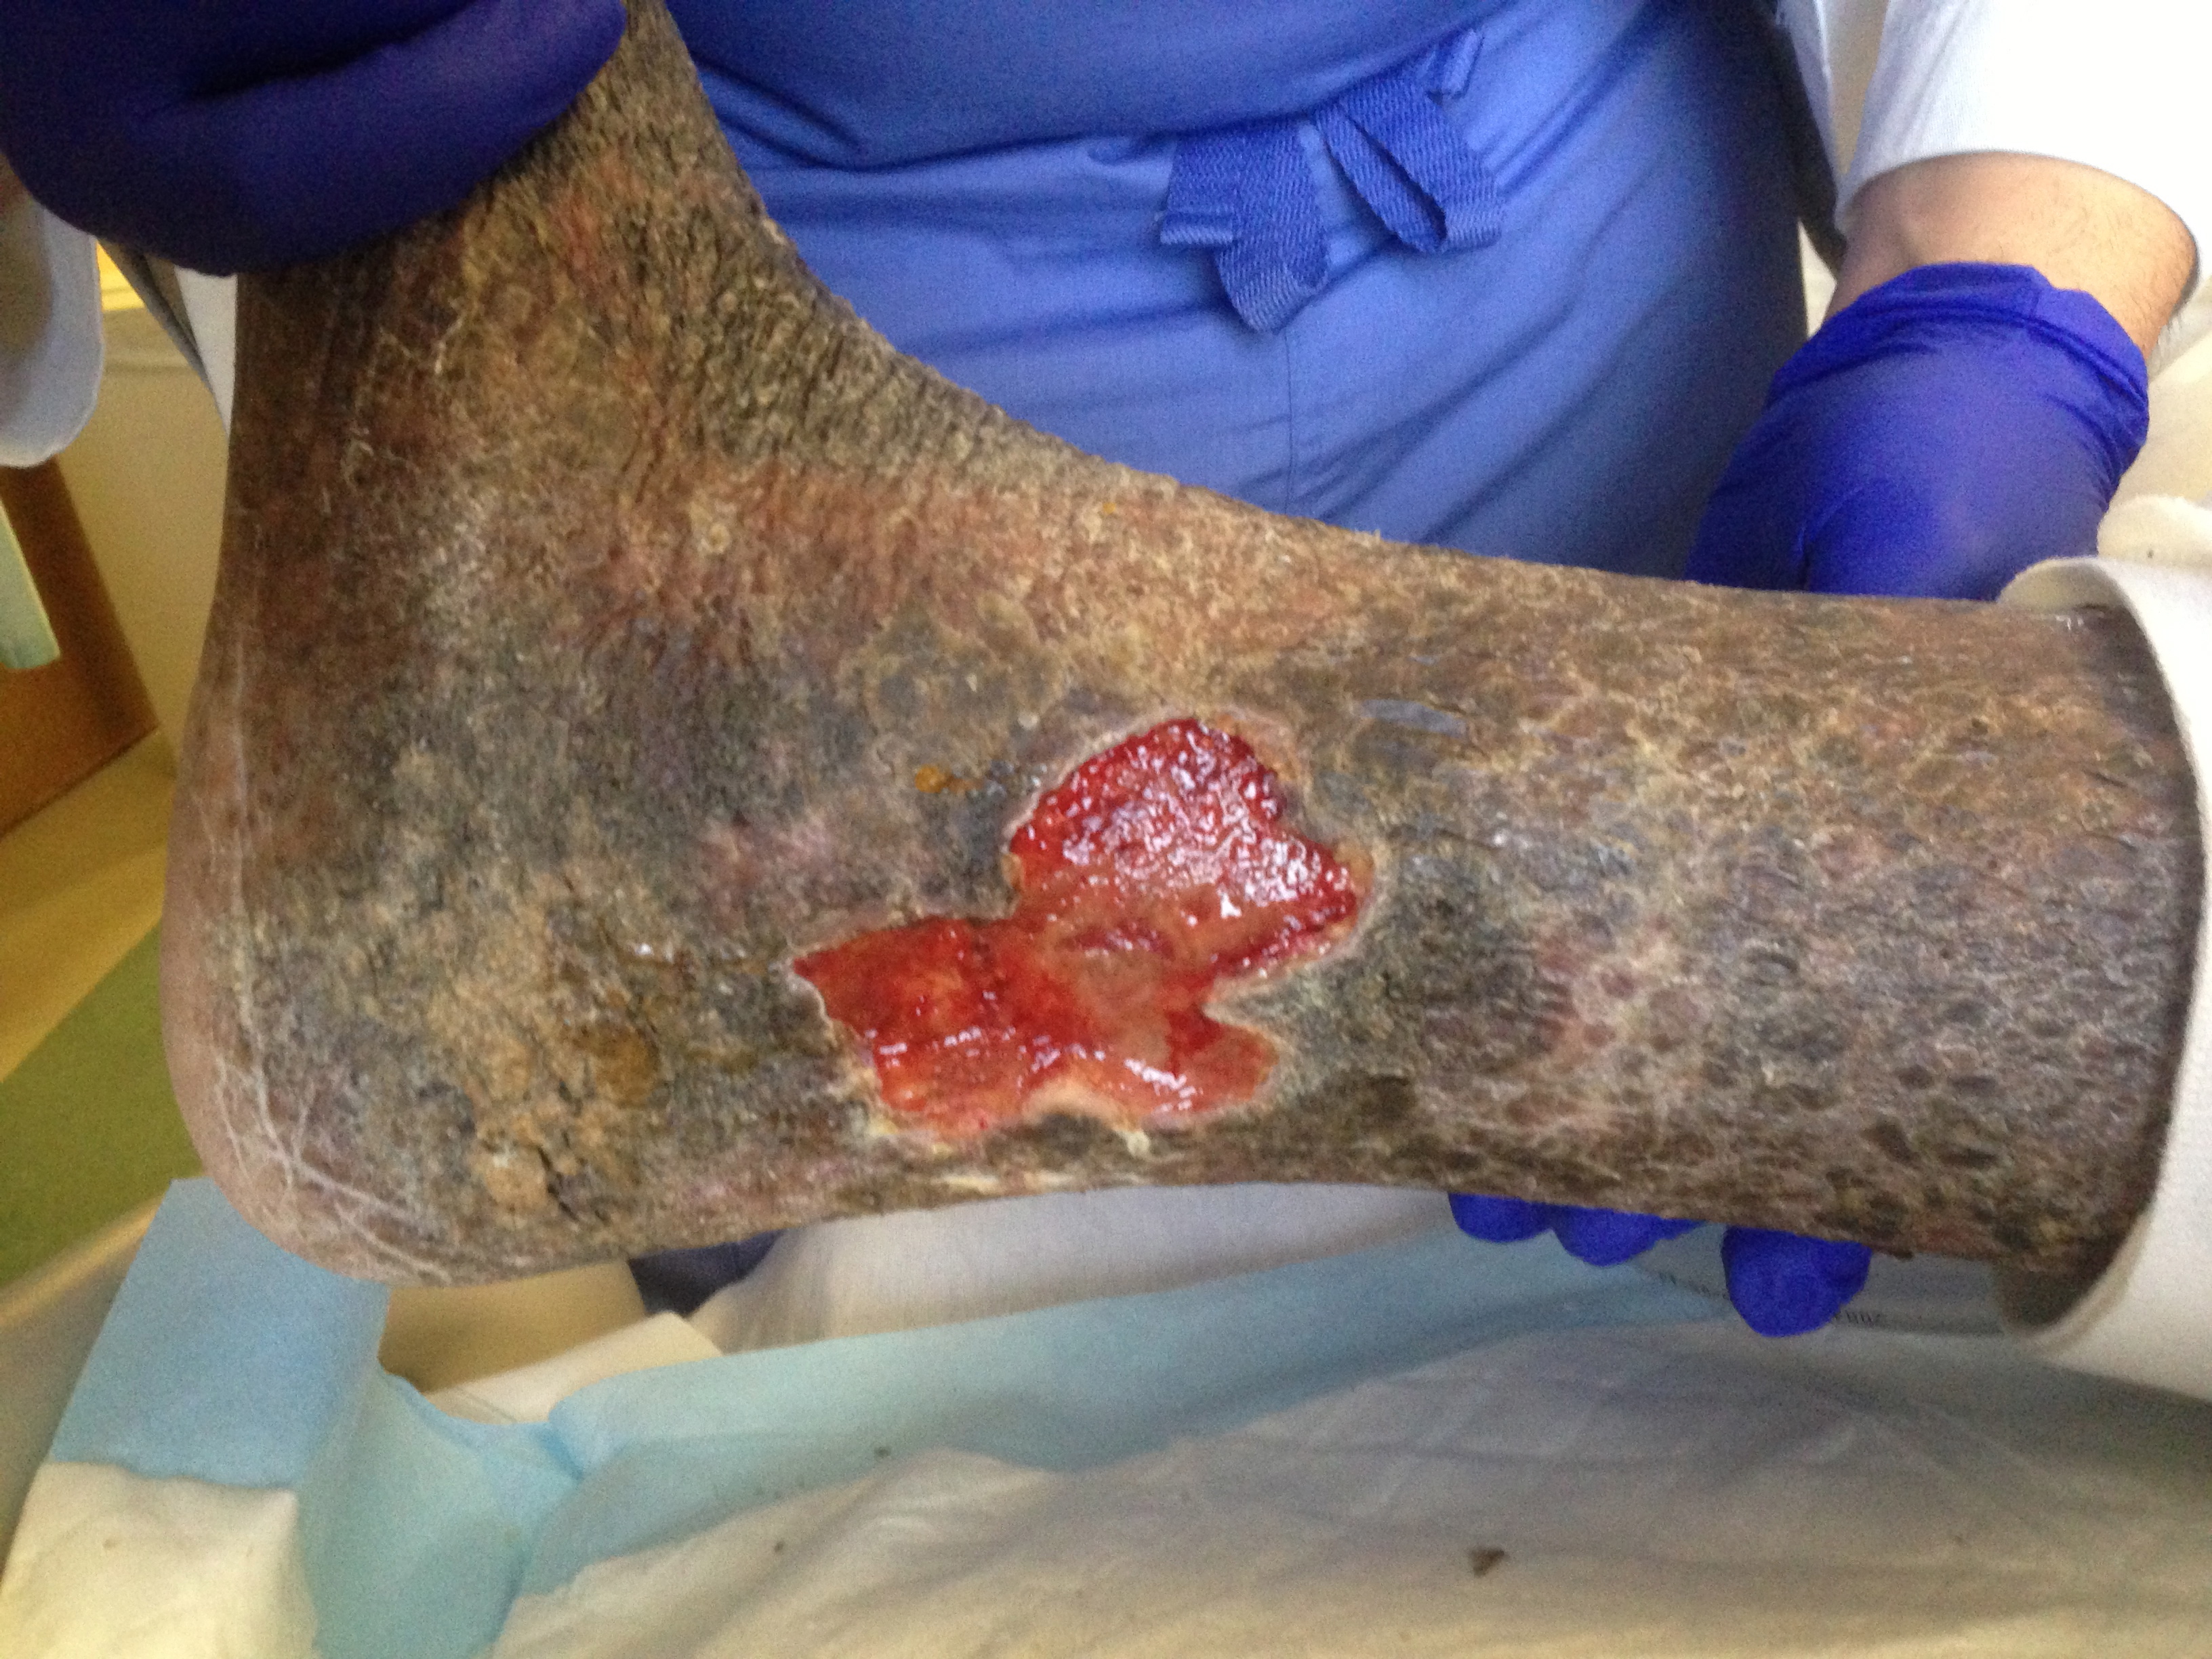 Venous stasis ulceration in classic lower medial leg (gaiter region) location. Note typical features of shallow wound base, irregular borders, healthy red granulation tissue, and surround lipodermatosclerosis.